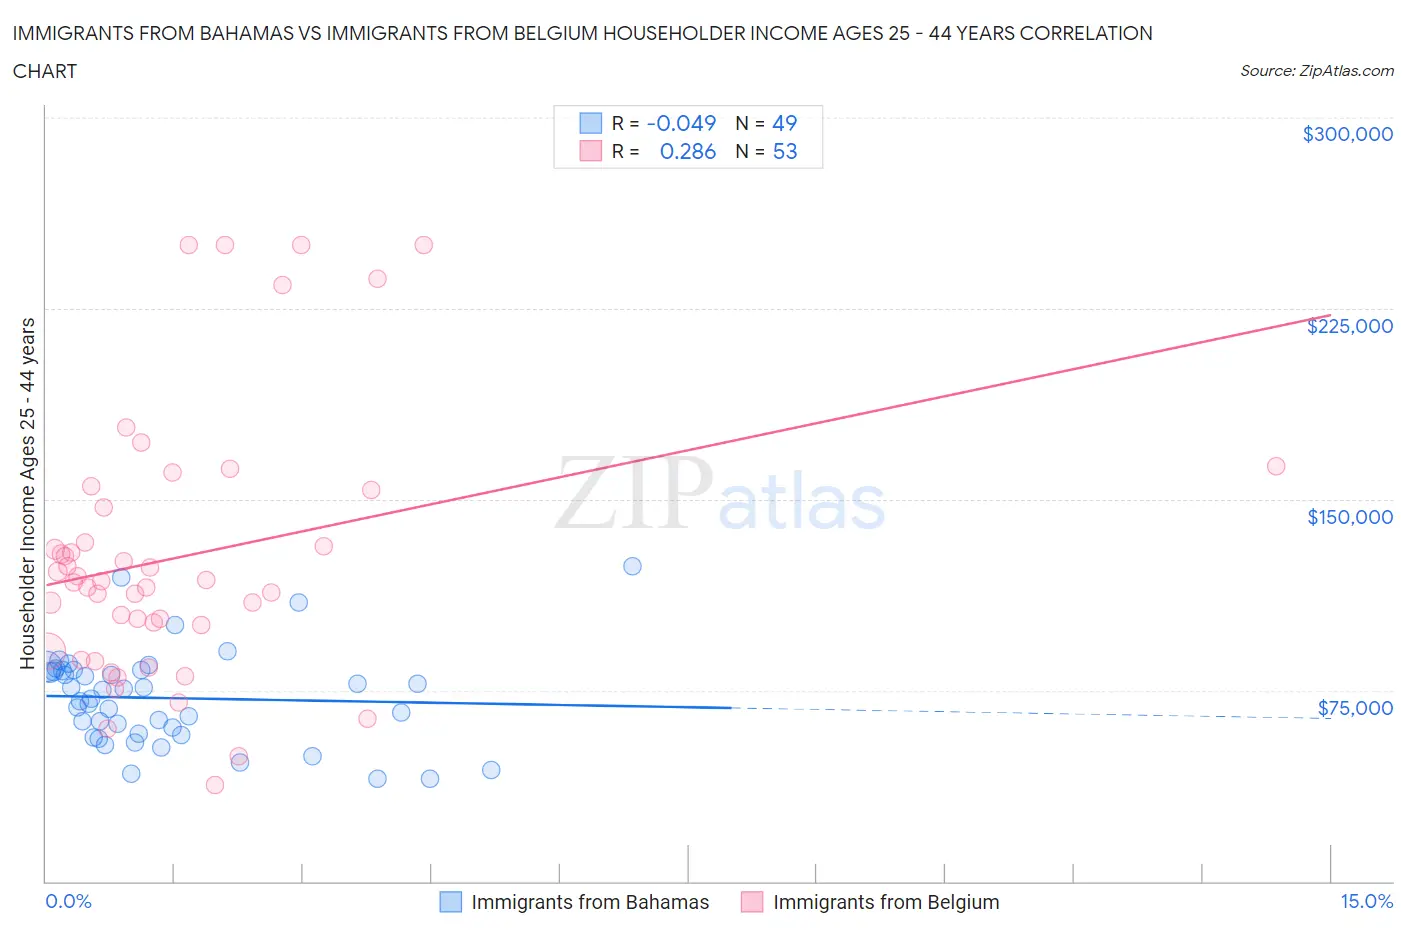 Immigrants from Bahamas vs Immigrants from Belgium Householder Income Ages 25 - 44 years